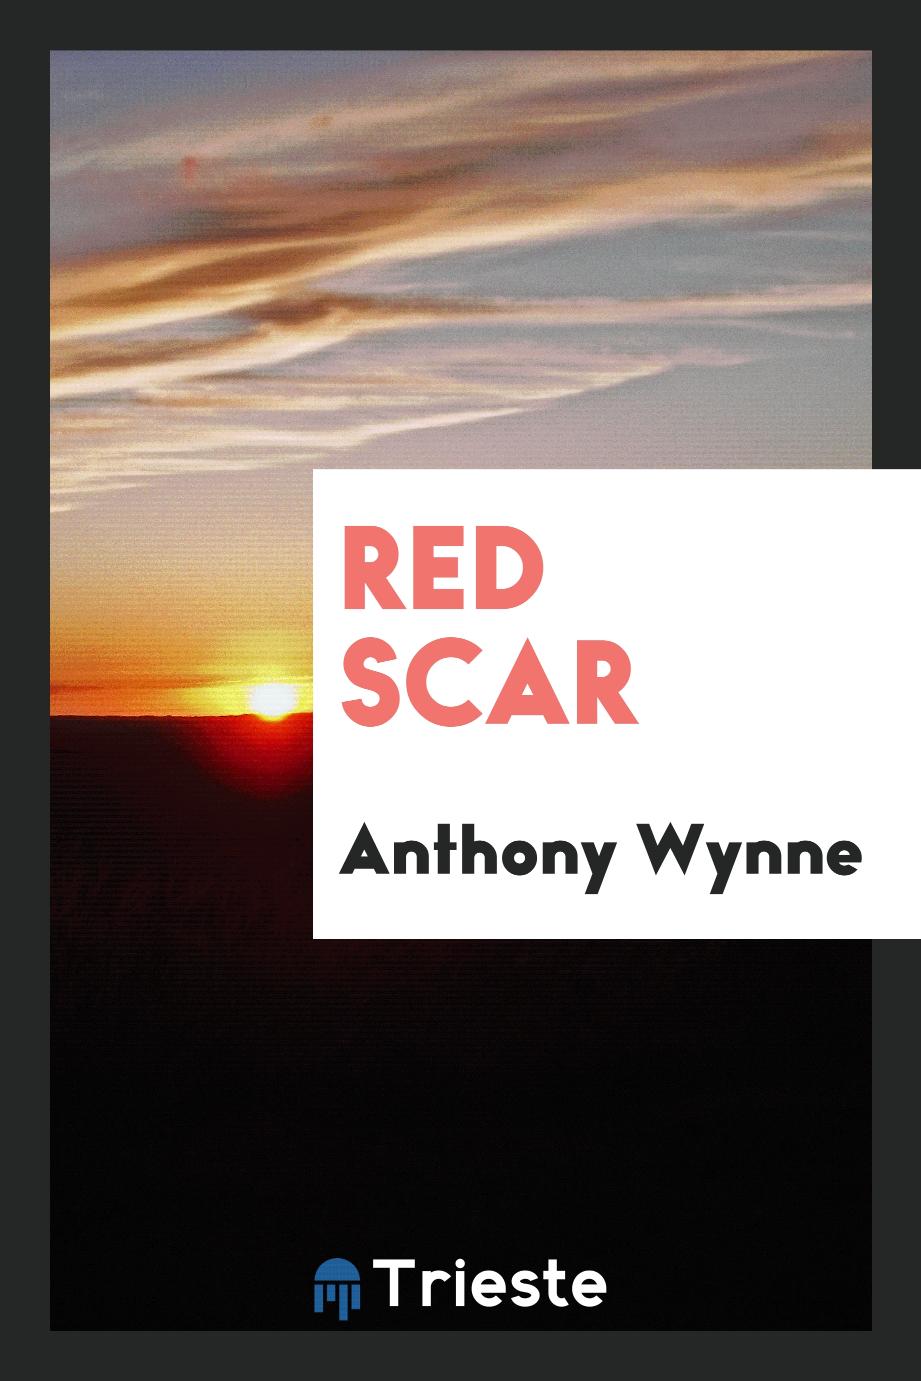 Red scar